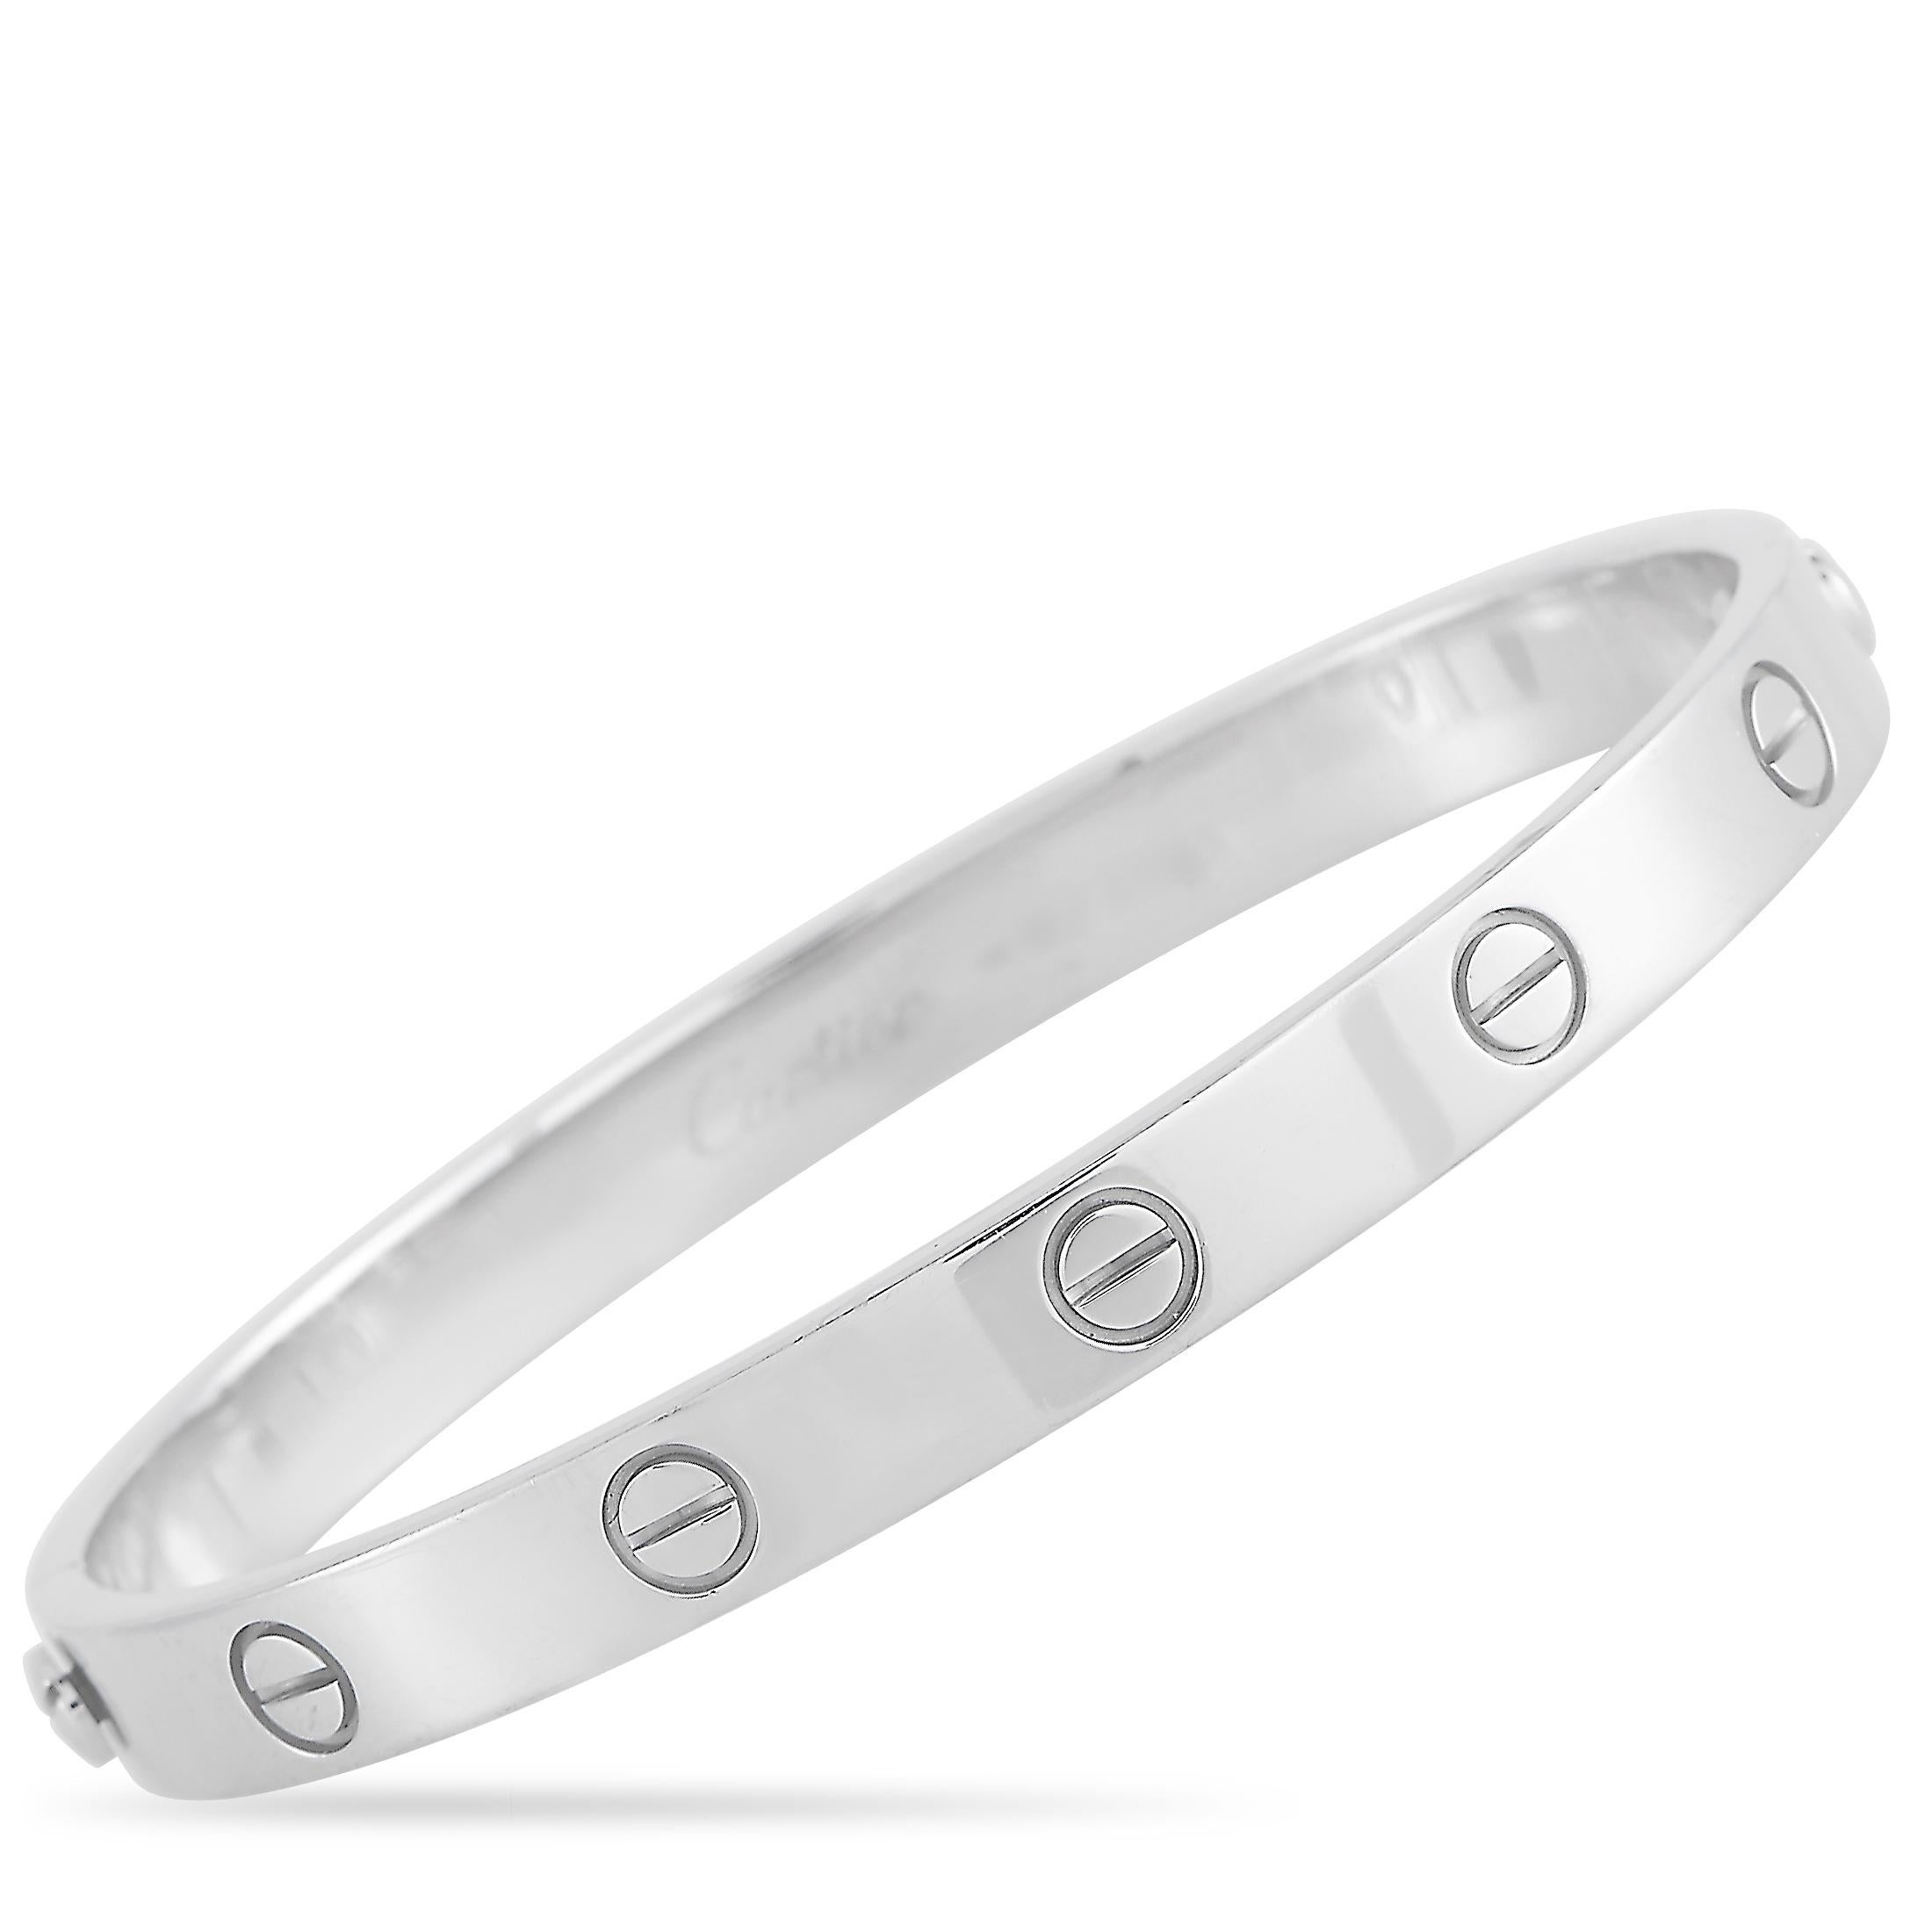 This LOVE bracelet is a classic Cartier offering. The bangle is made with 18K white gold and features the iconic Cartier screw motif. The inside of the bangle is inscribed with the Cartier brand name. The bracelet is a size 17, and is 6.7 inches in